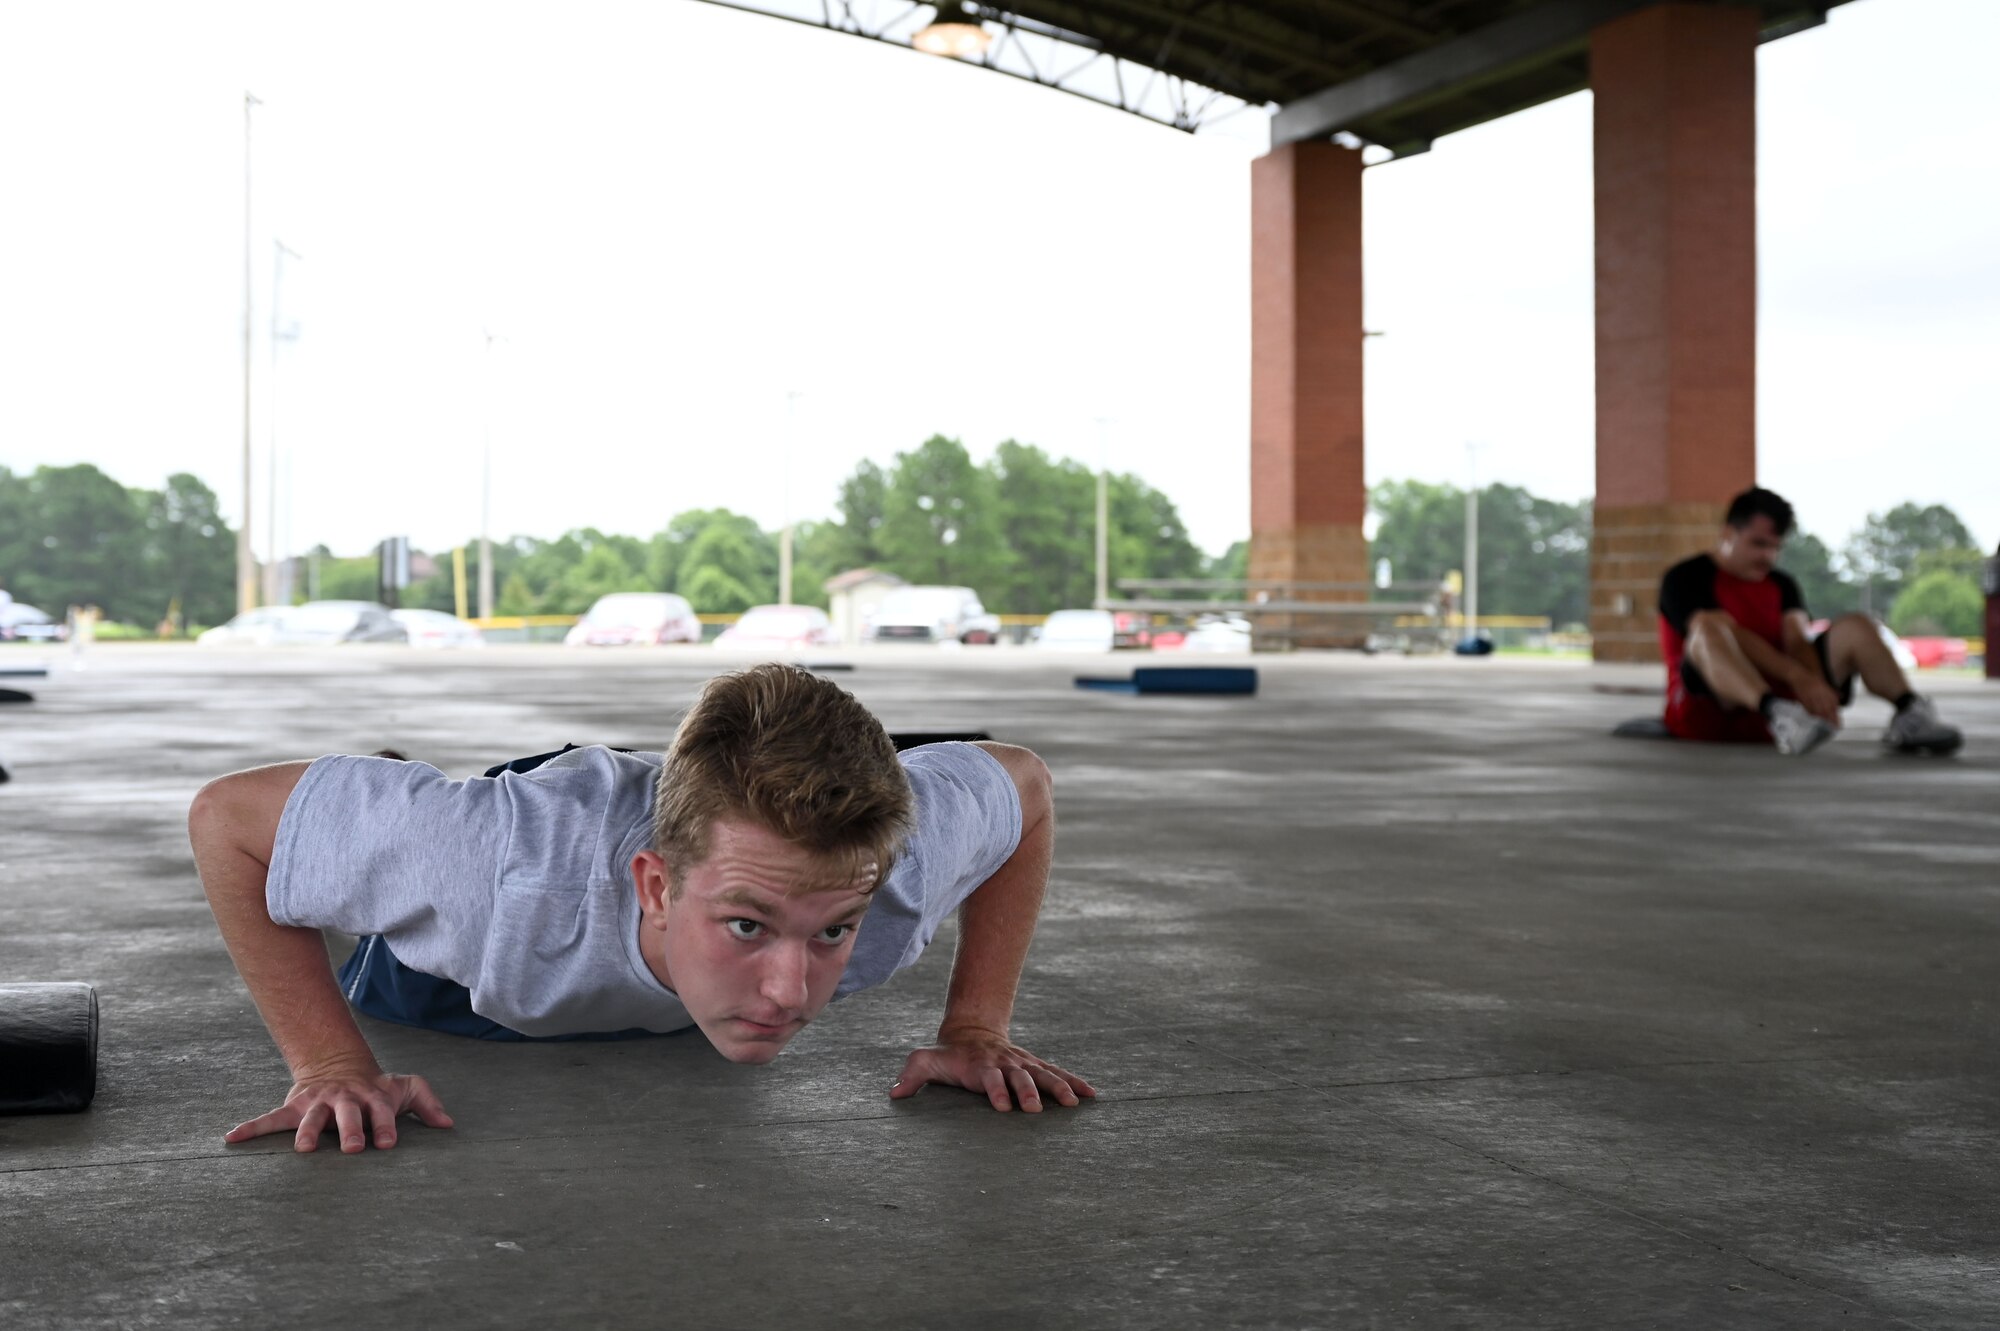 Airman 1st Class Isaiah Miller, 19th Airlift Wing Public Affairs mass communications apprentice, does a push-up during a Vital 90 course as part of Wingman Day at Little Rock Air Force Base.